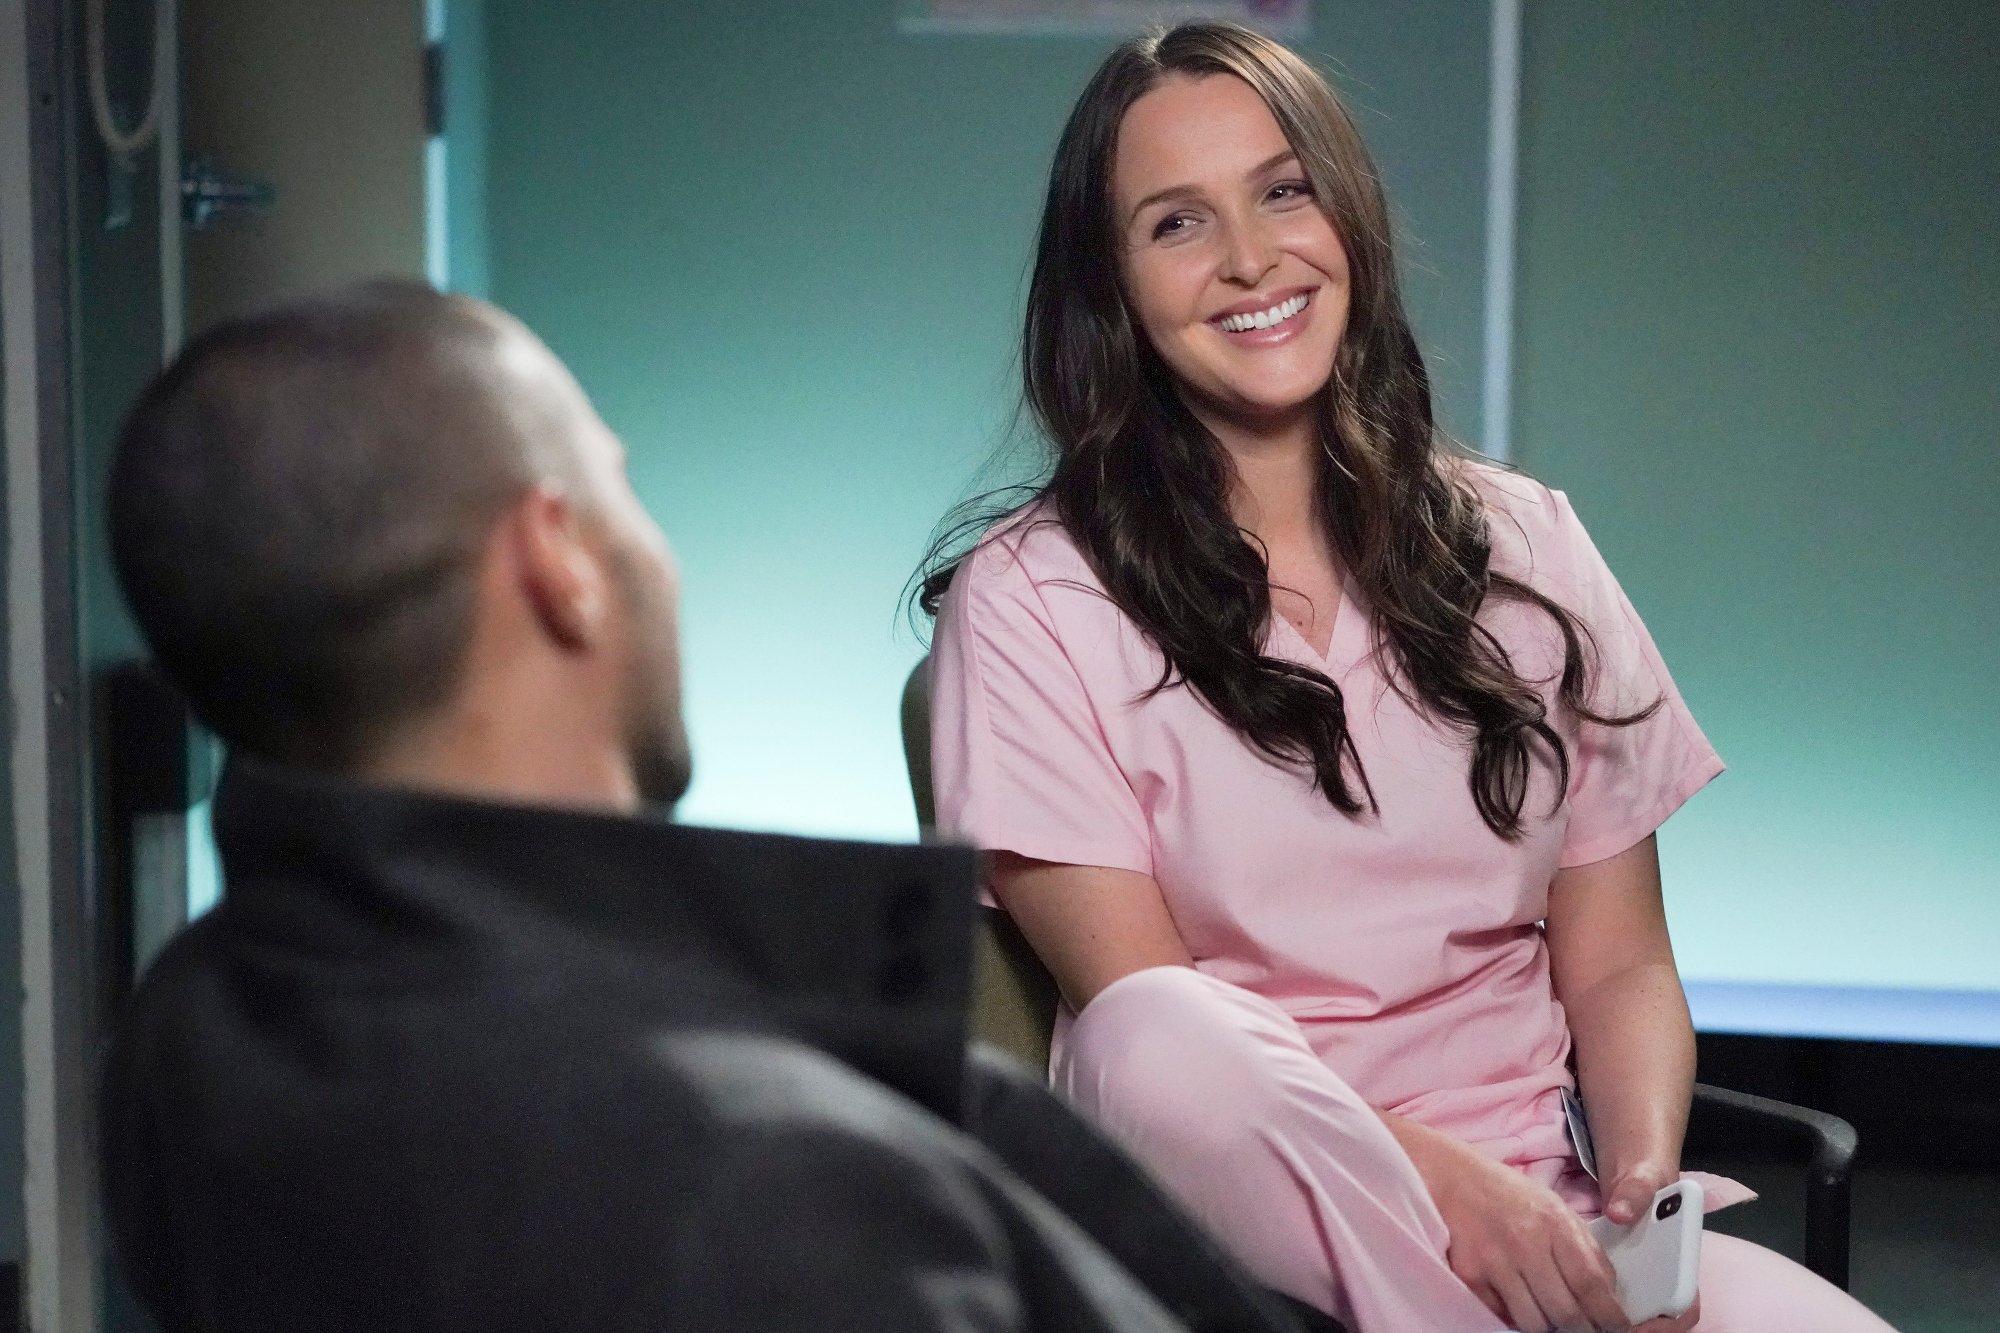 Camilla Luddington as Jo in ABC's 'Grey's Anatomy.' She's sitting in pink scrubs and laughing.